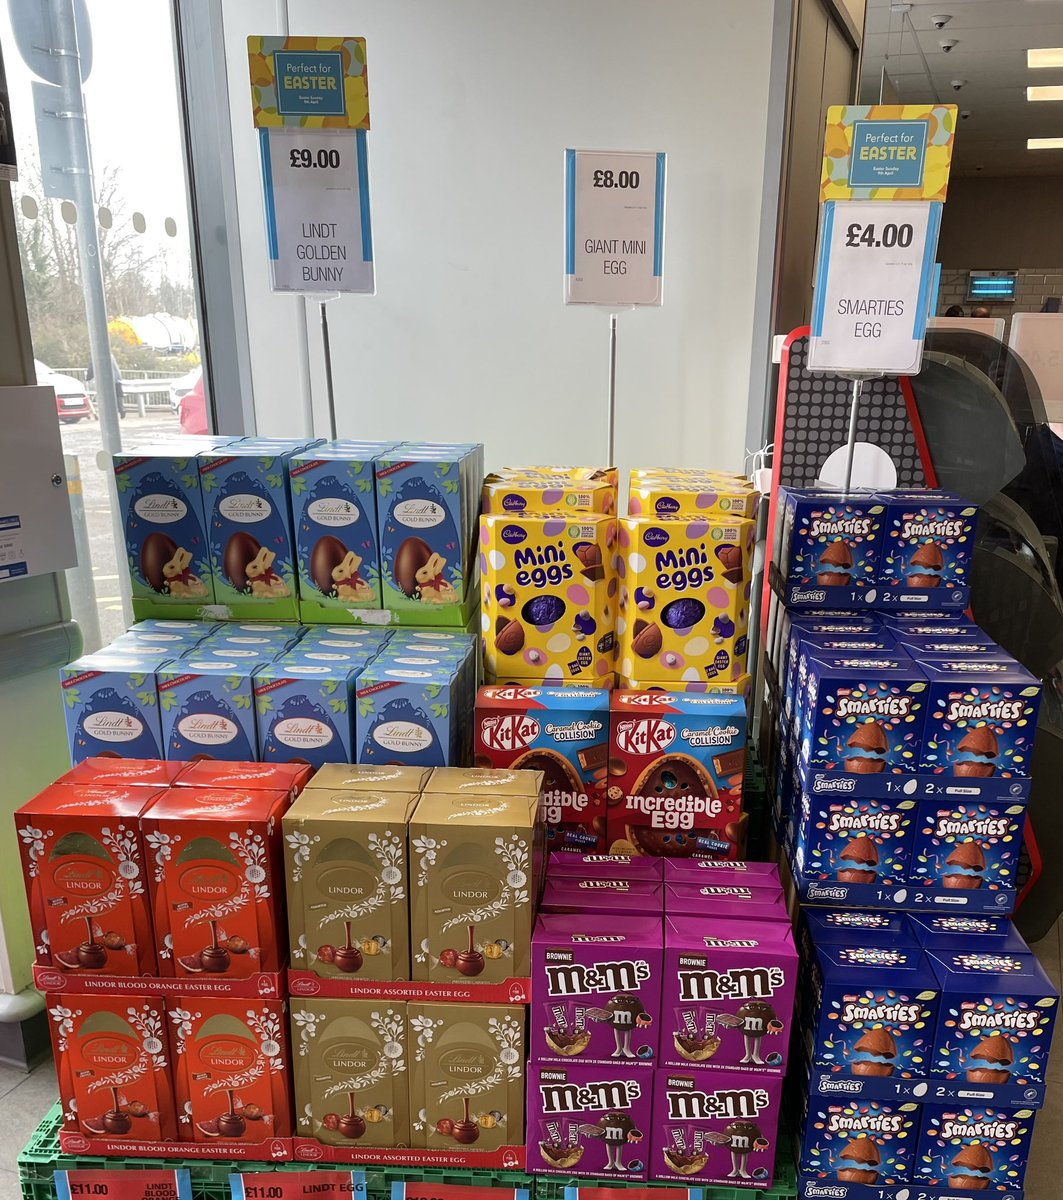 Ready for Easter trade in bishopton! @Poody1976 @andybDGM @KateGraham03